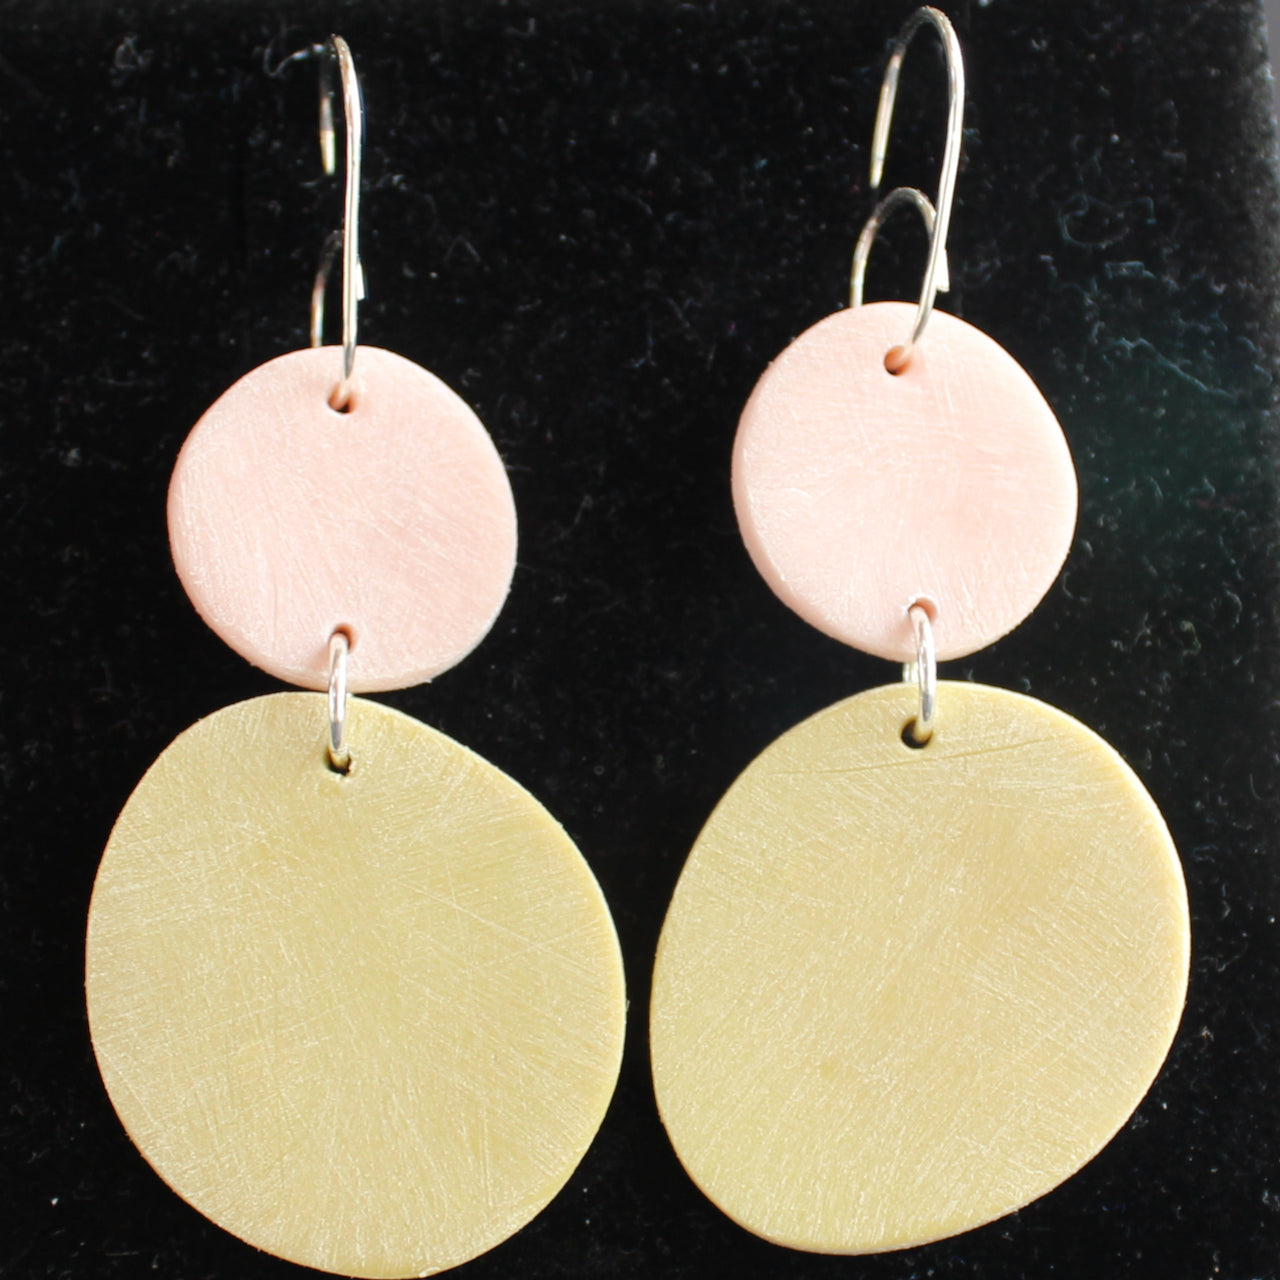 a pair of drop earrings of a large yellow disc with a smaller pale pink on a silver fixing by Clare Lloyd, UK based jewellery designer.